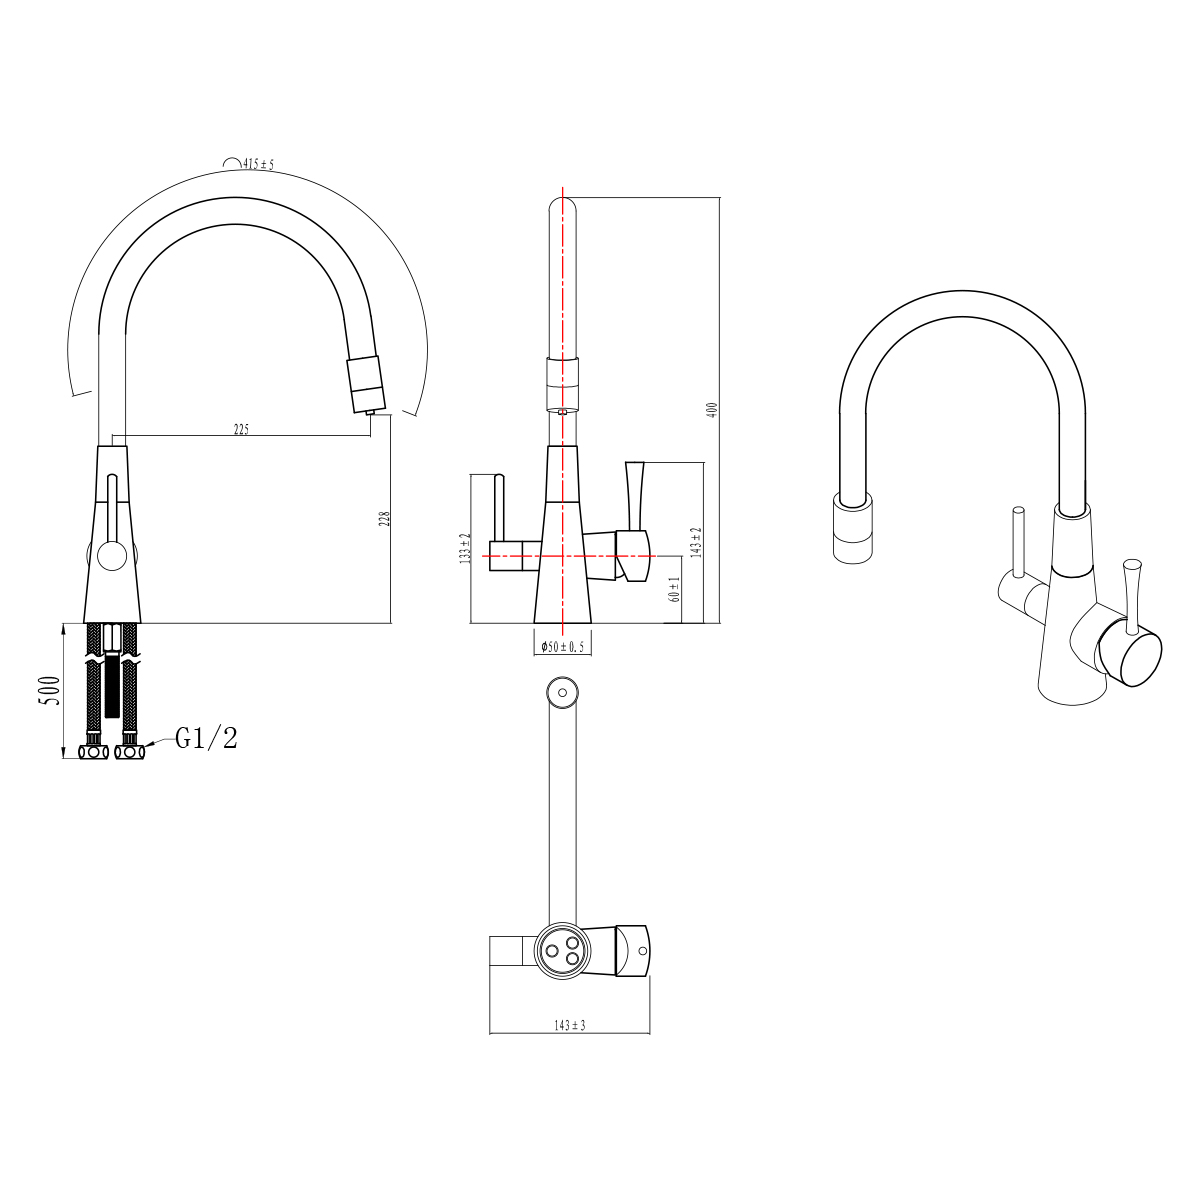 LM3075C-White Kitchen faucet with connection to drinking 
water supply